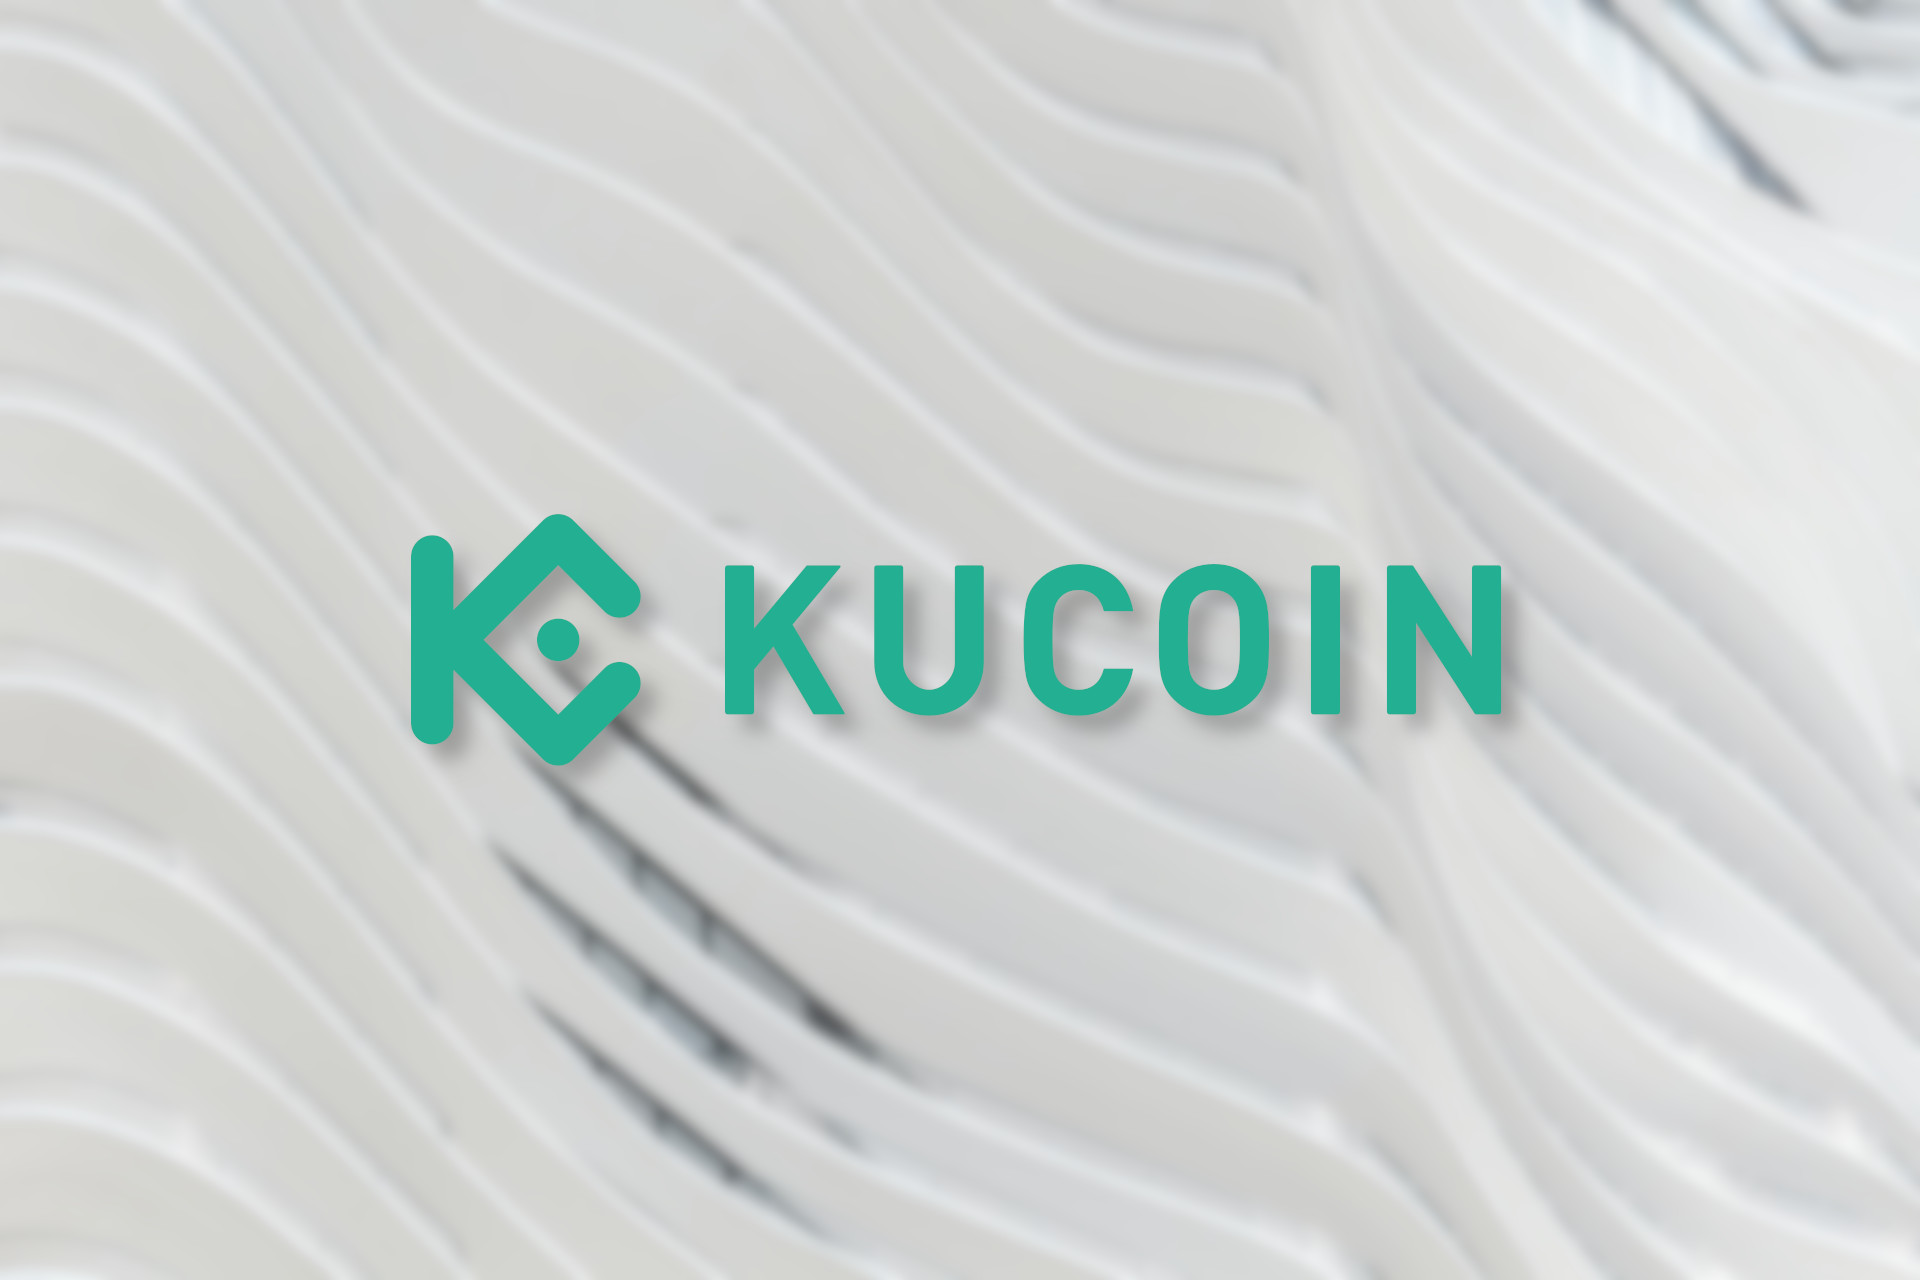 KuCoin cryptocurrency exchange logo cover